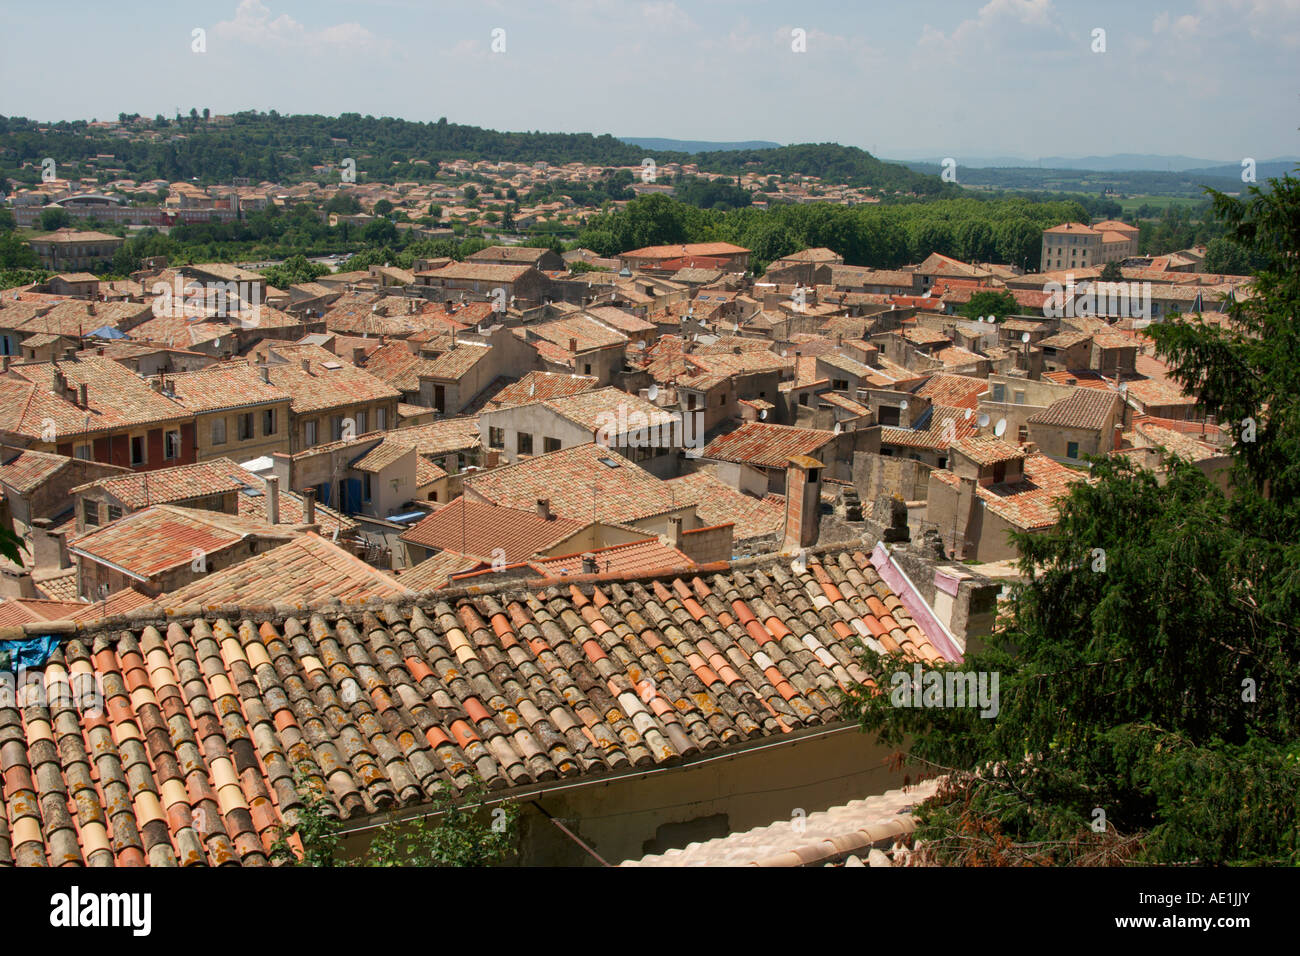 A view over the rooftops of Sommieres in the Gard Languedoc Roussillon. The South of France. Stock Photo